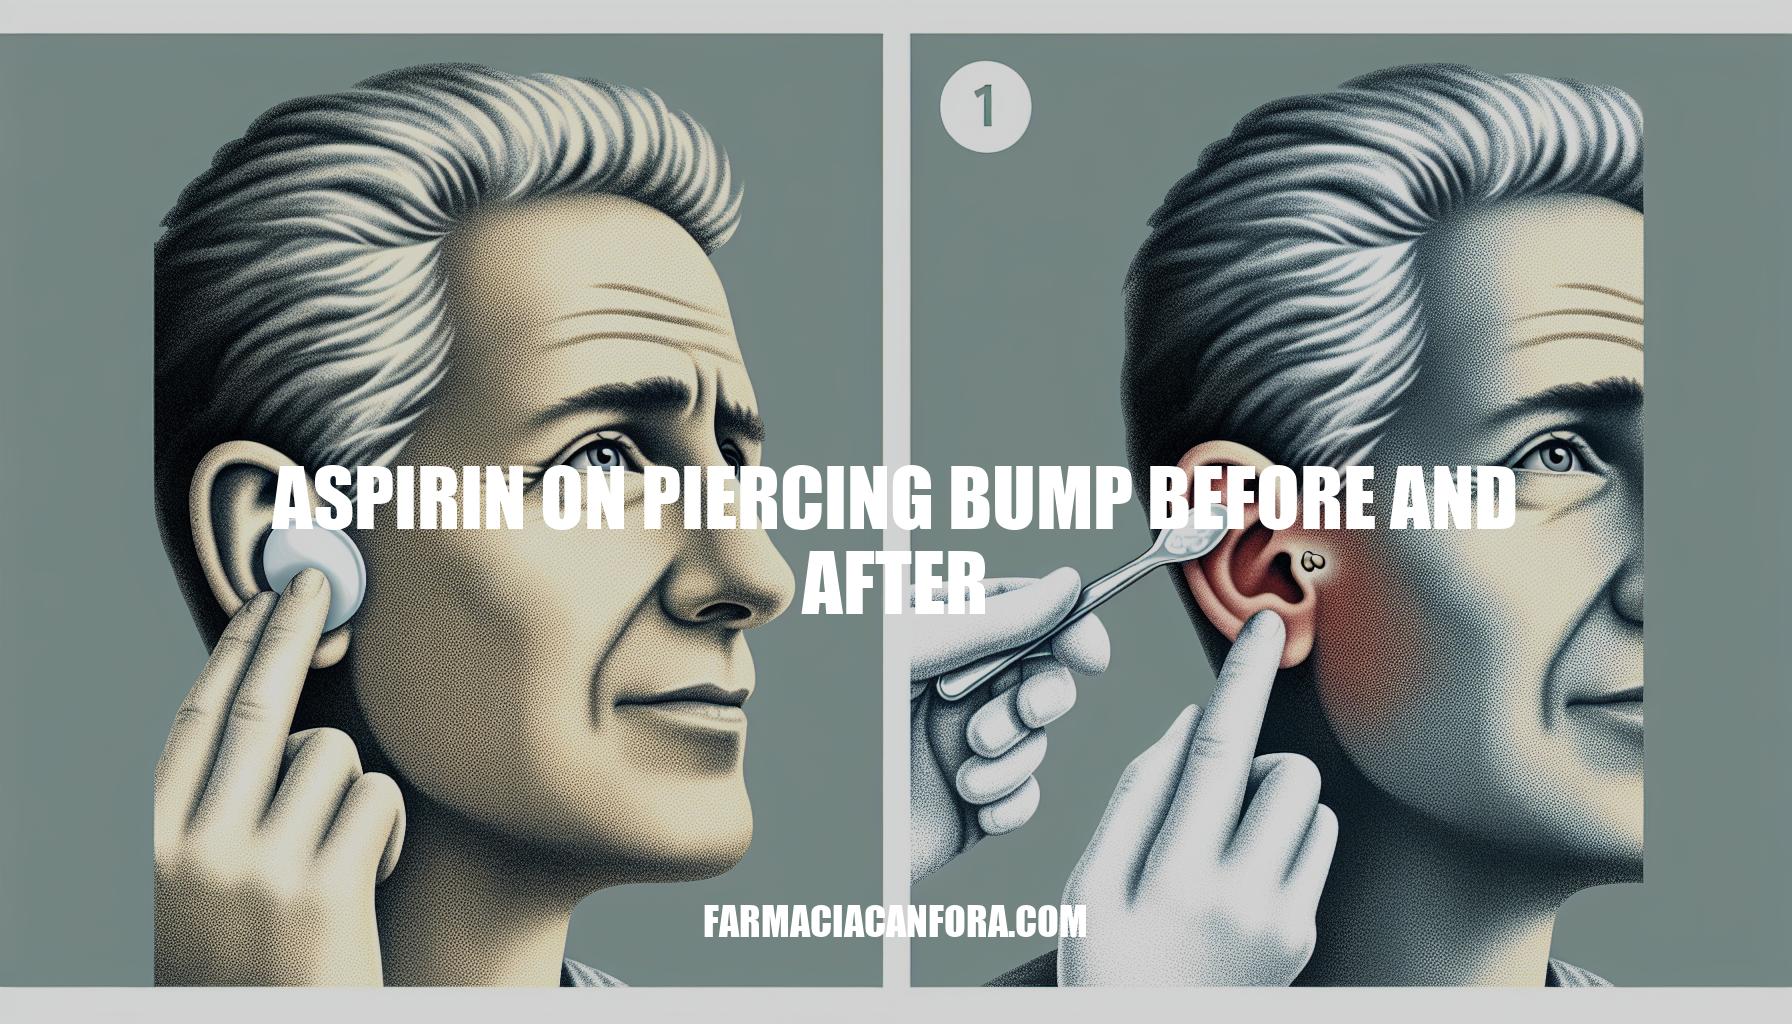 Using Aspirin on Piercing Bumps: Before and After Guide